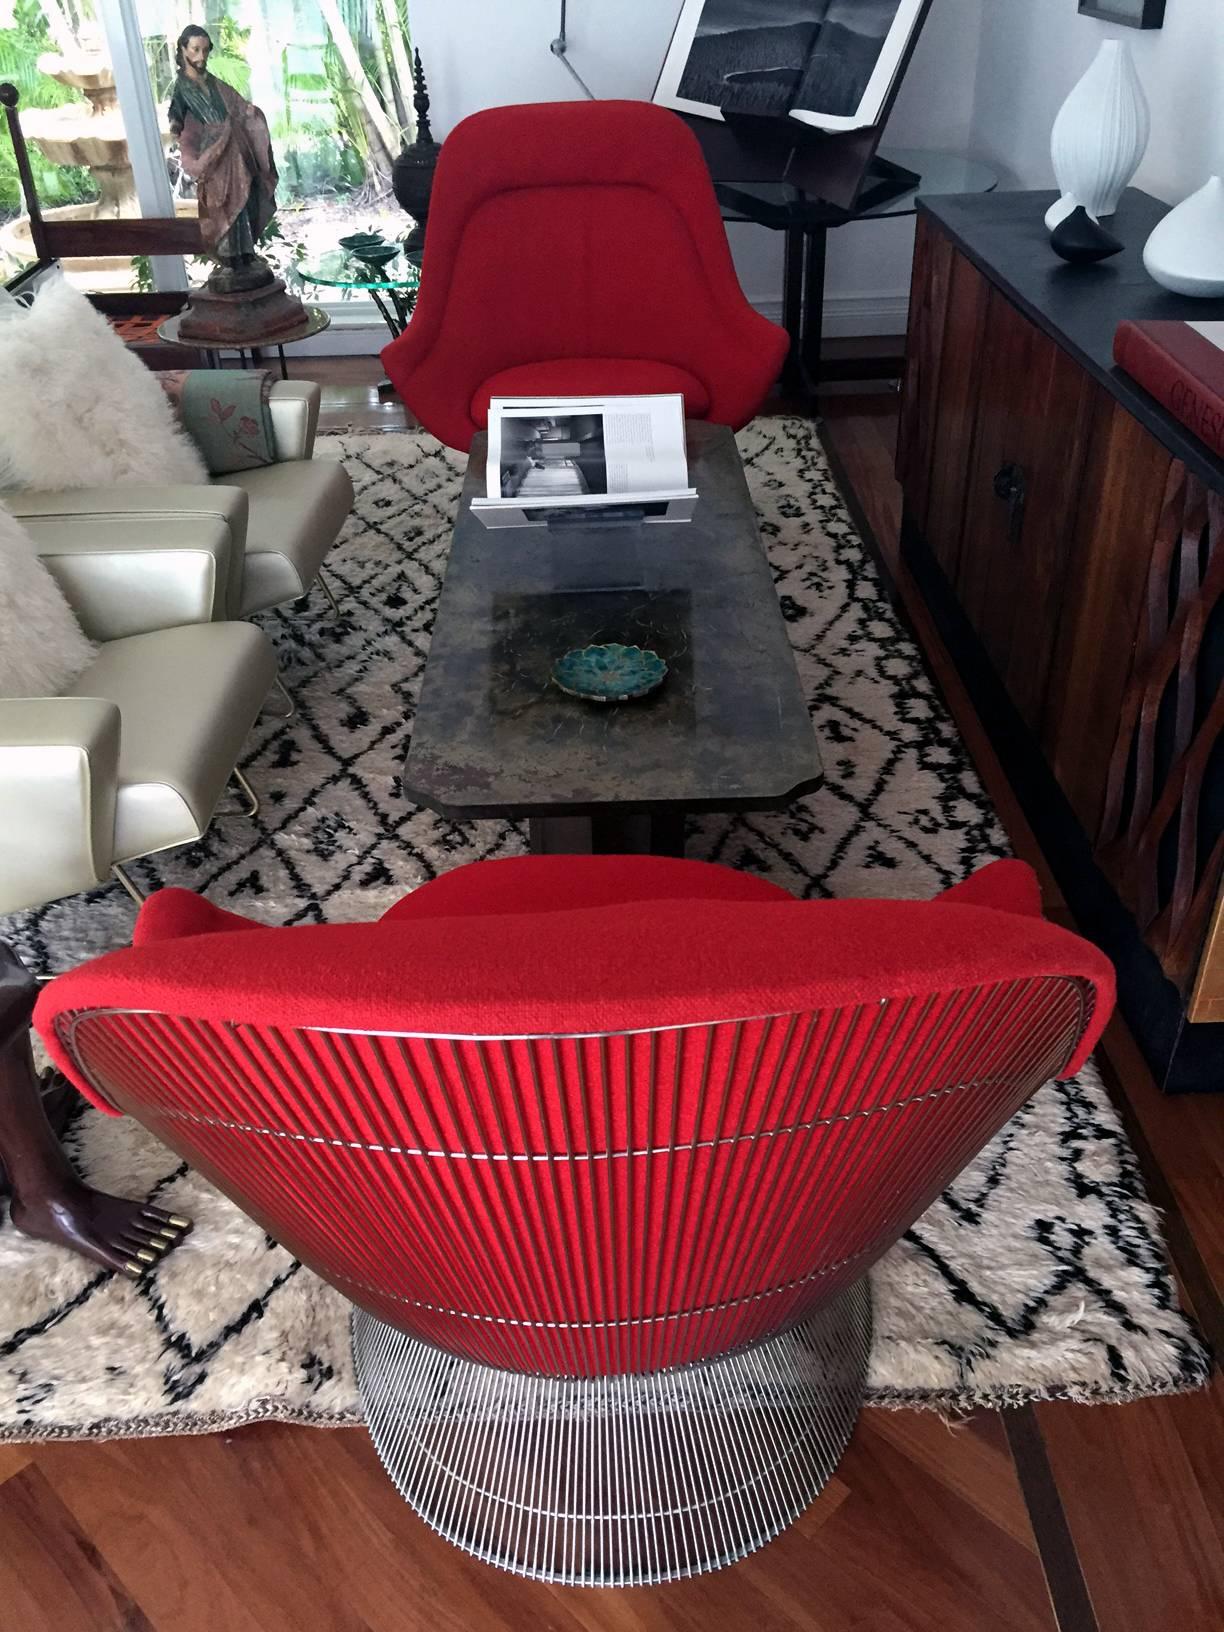 A great pair of vintage wire lounge easy chairs designed by Warren Platner for Knoll circa 1970s-80s. The iconic bent wire sitting collection was introduced in 1966, the easy chair model was produced until 1988 and only reissued only for custom-make